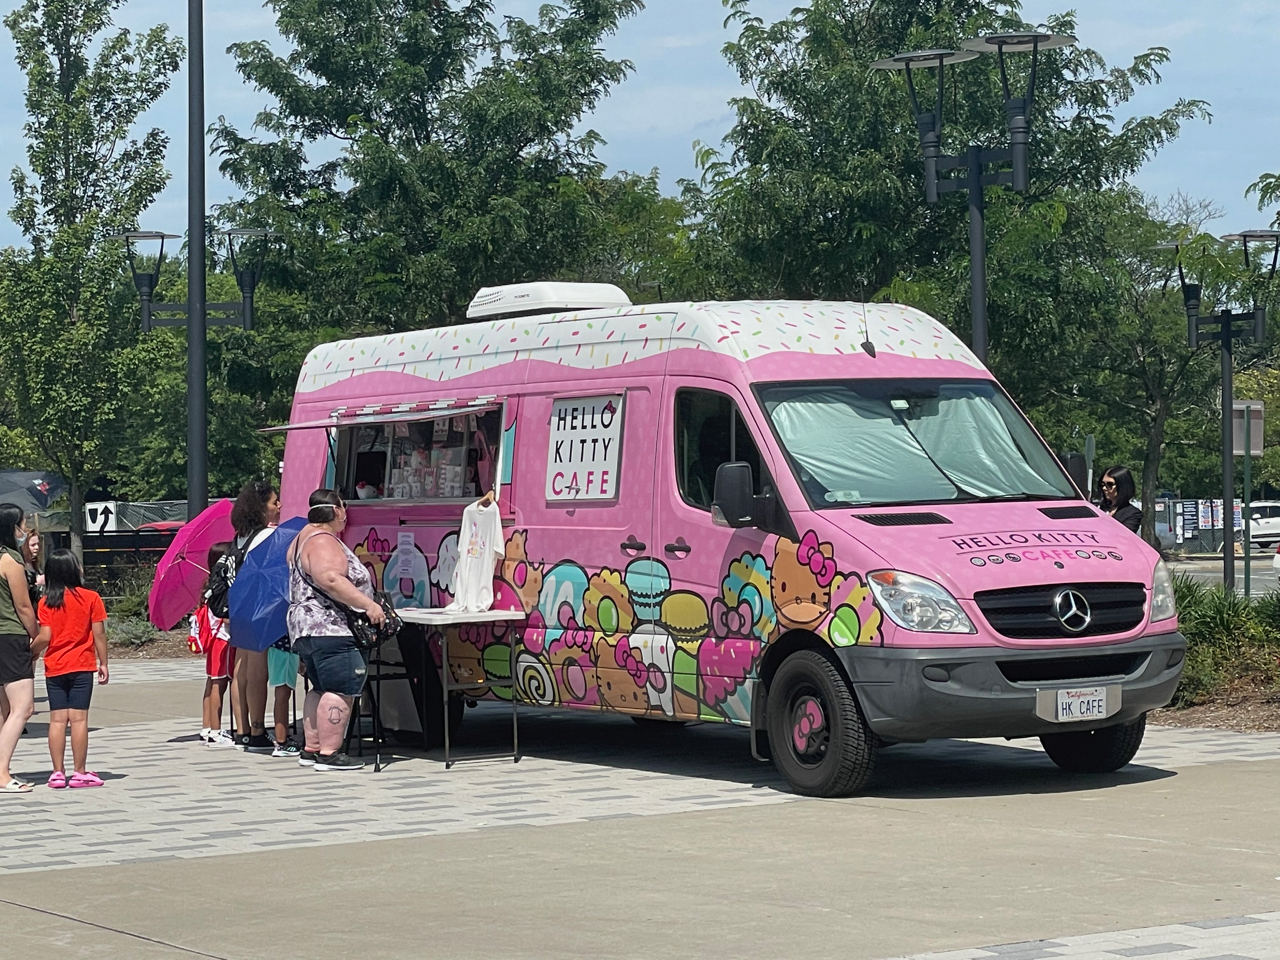 Today only: Long lines already forming as Hello Kitty Cafe Truck